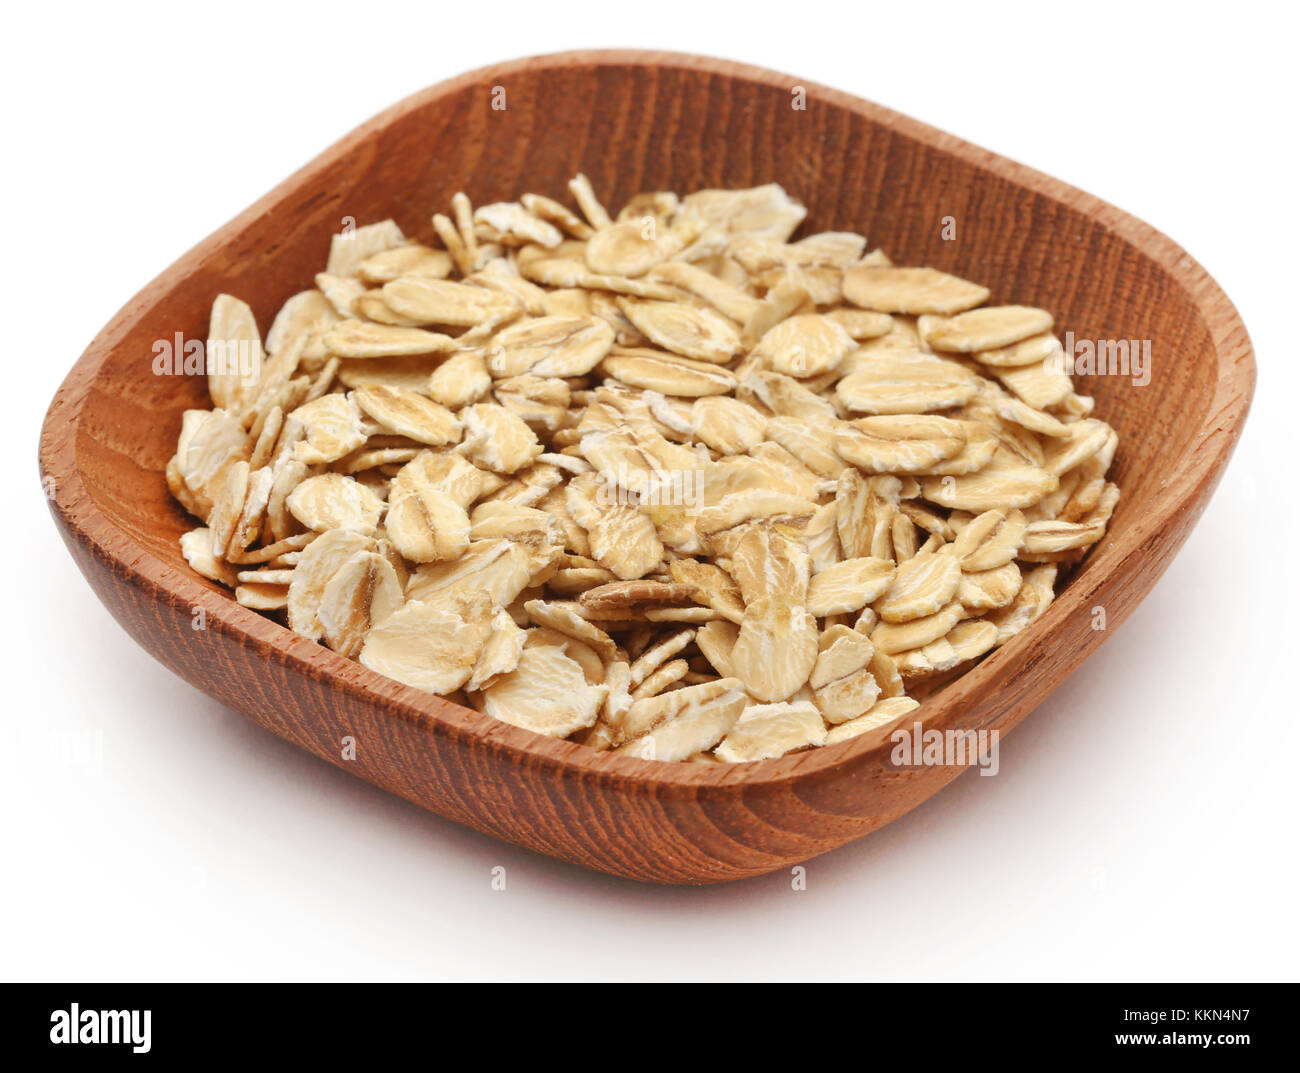 Oats in wooden bowl isolated over white background Stock Photo